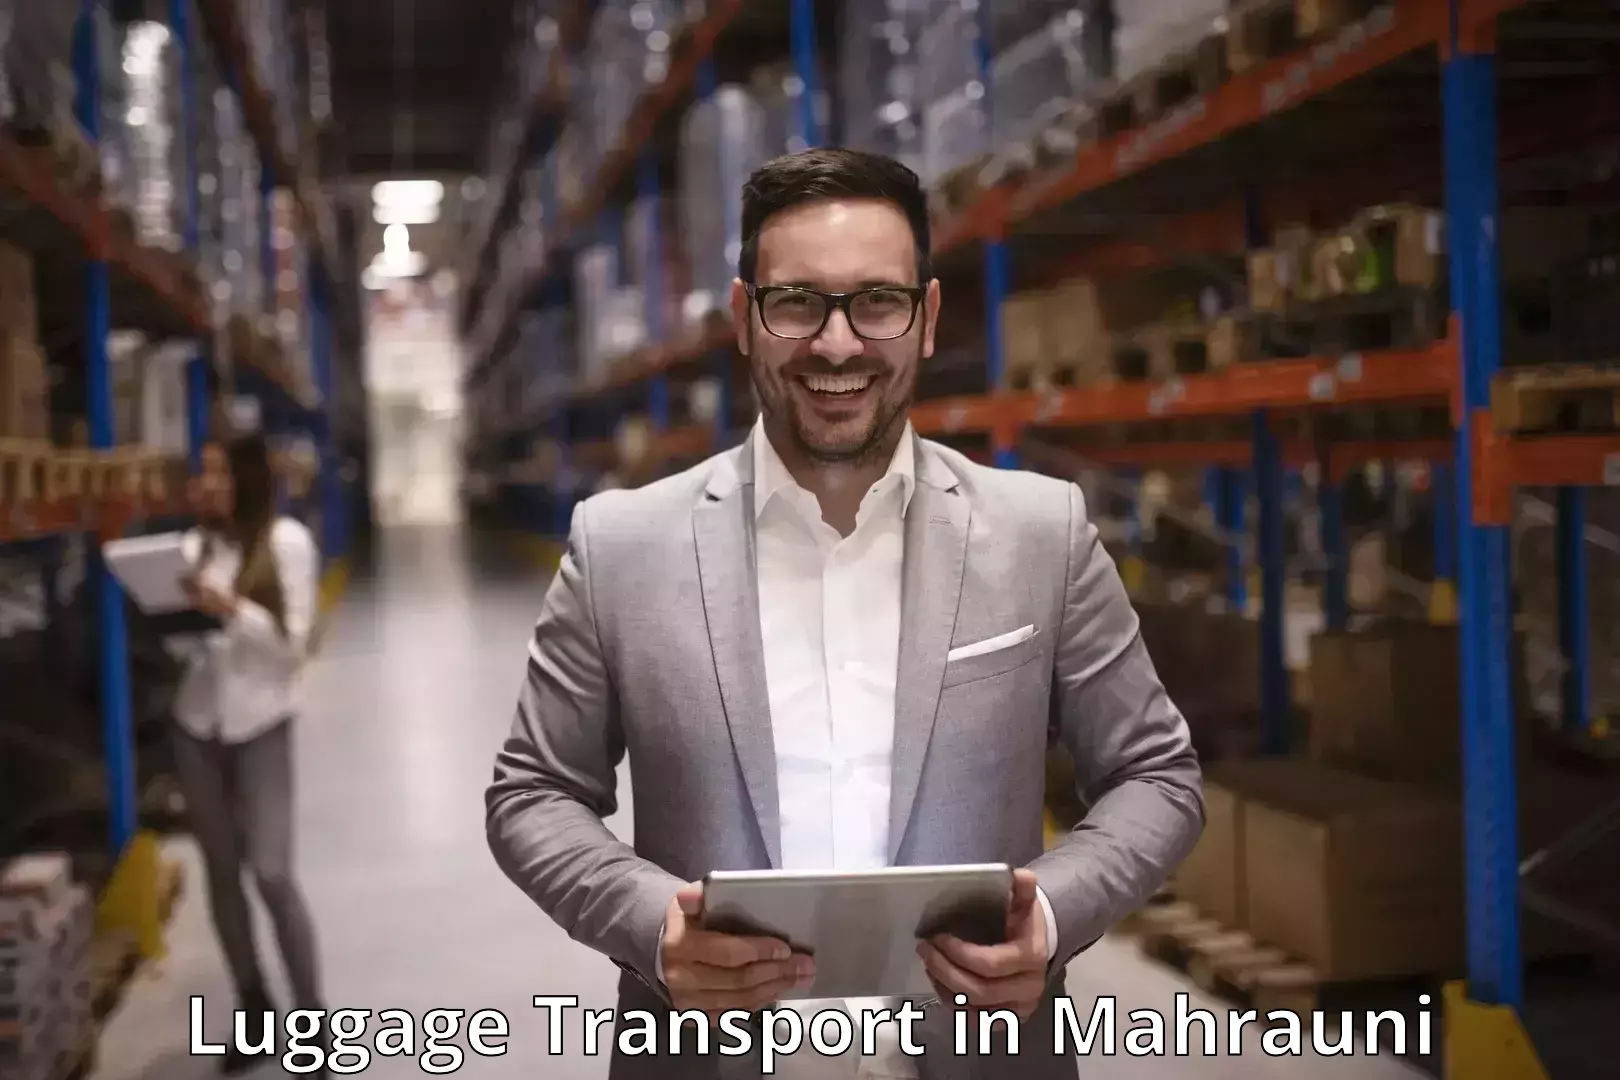 Baggage shipping experience in Mahrauni